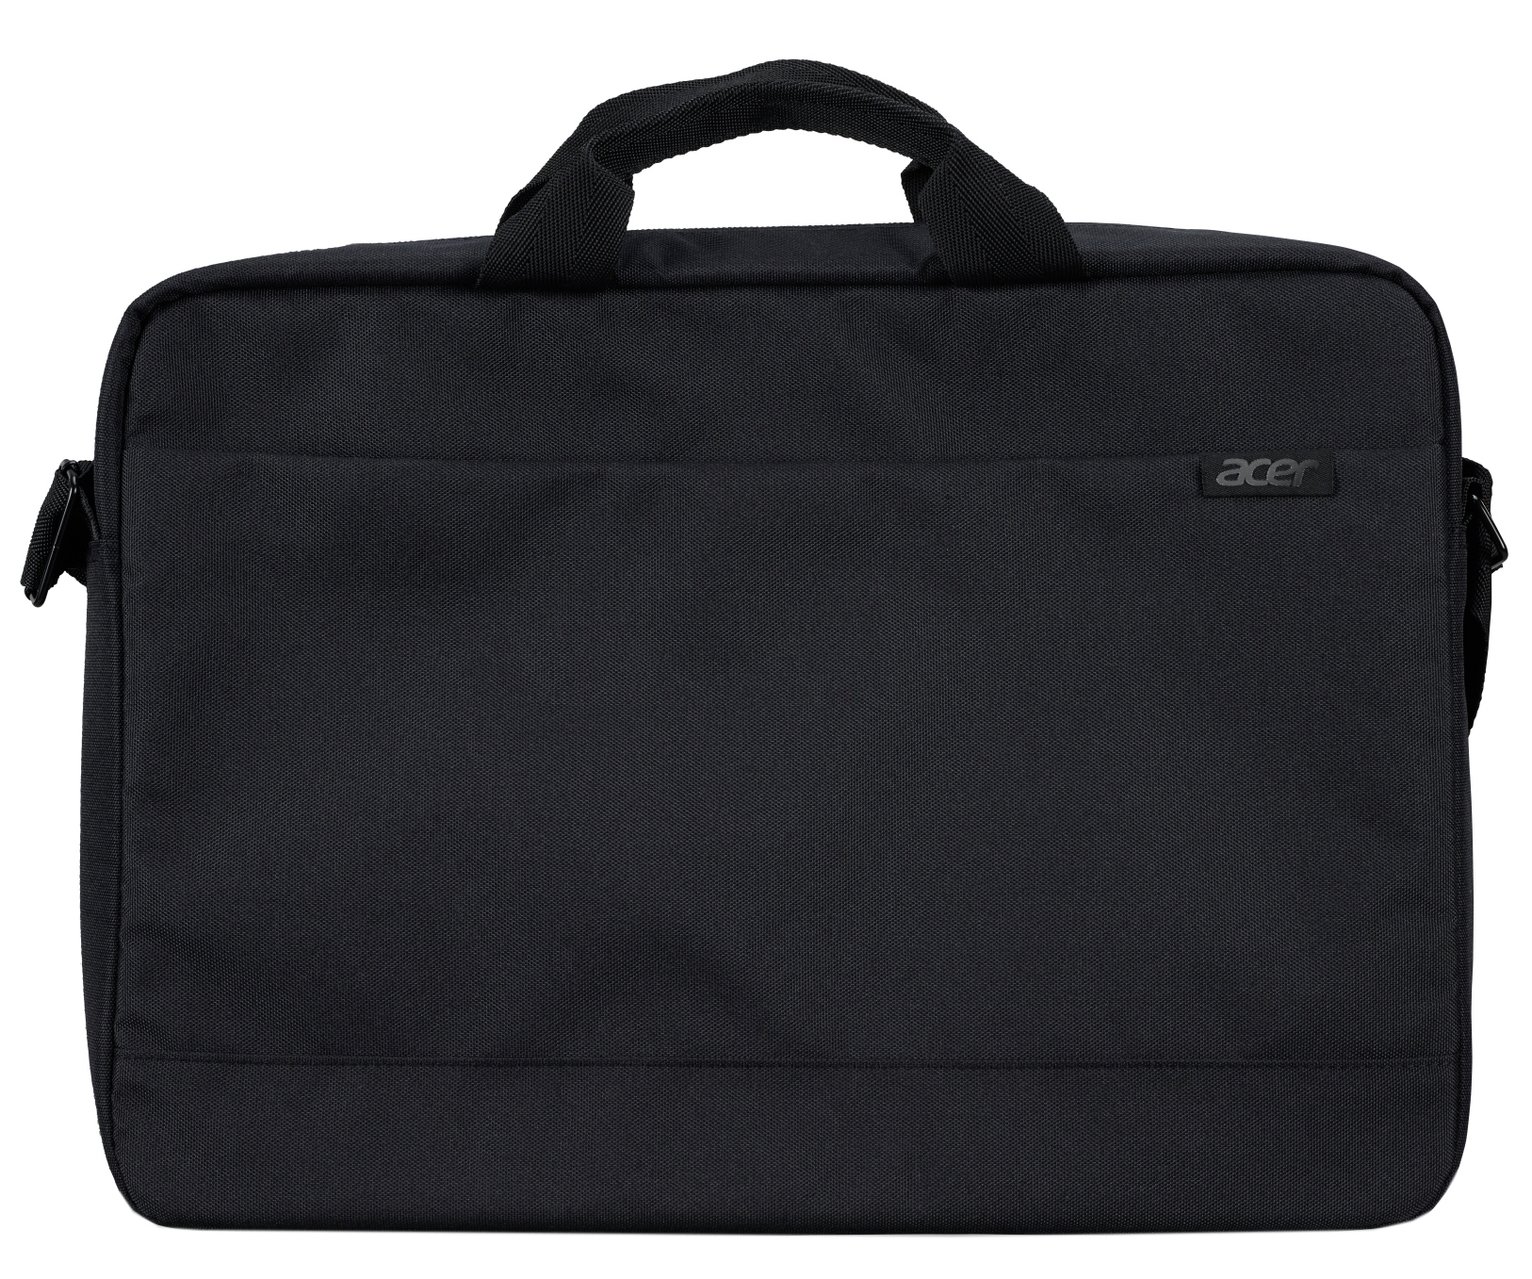 Acer 15.6 Inch Laptop Carry Case Review